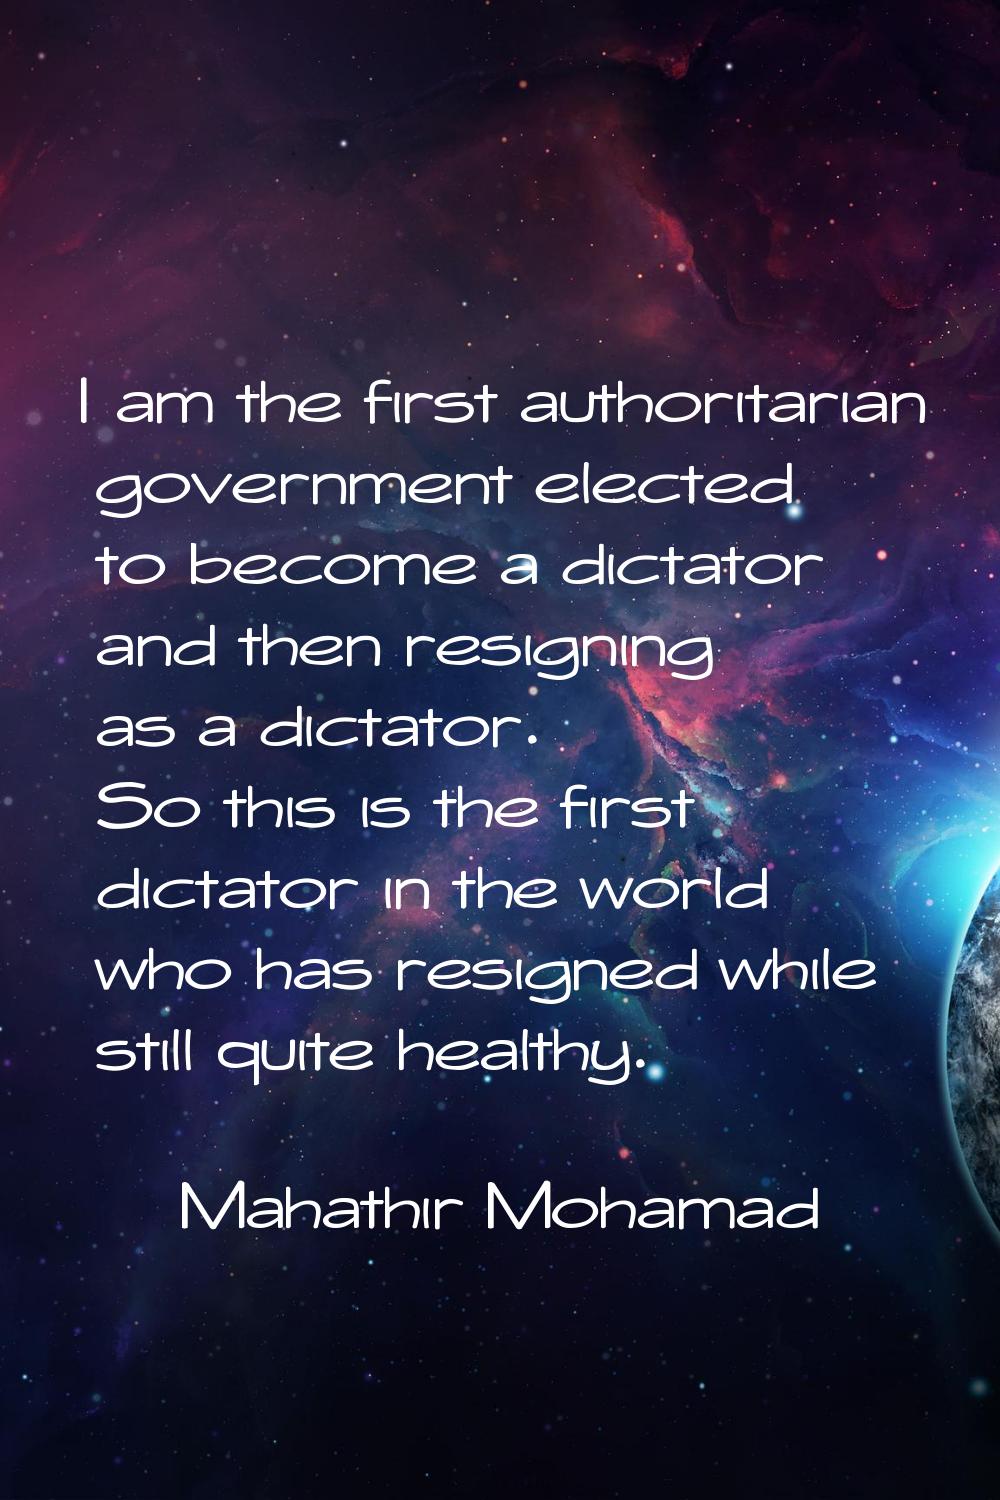 I am the first authoritarian government elected to become a dictator and then resigning as a dictat